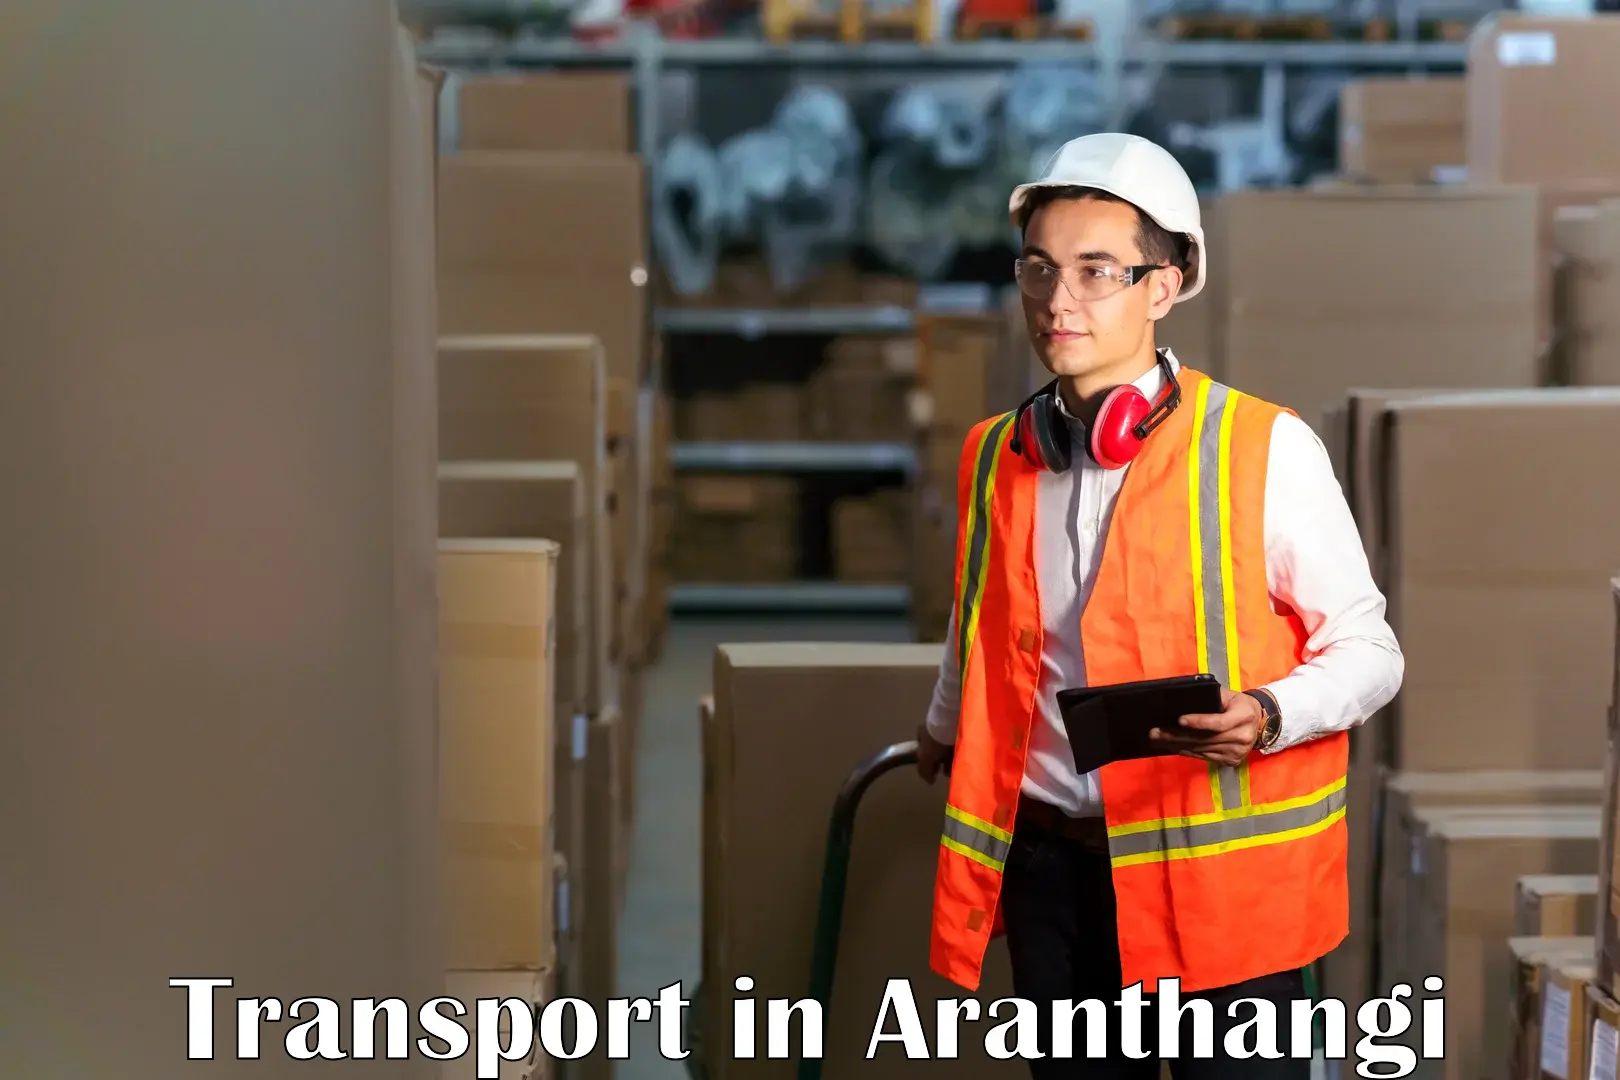 Luggage transport services in Aranthangi